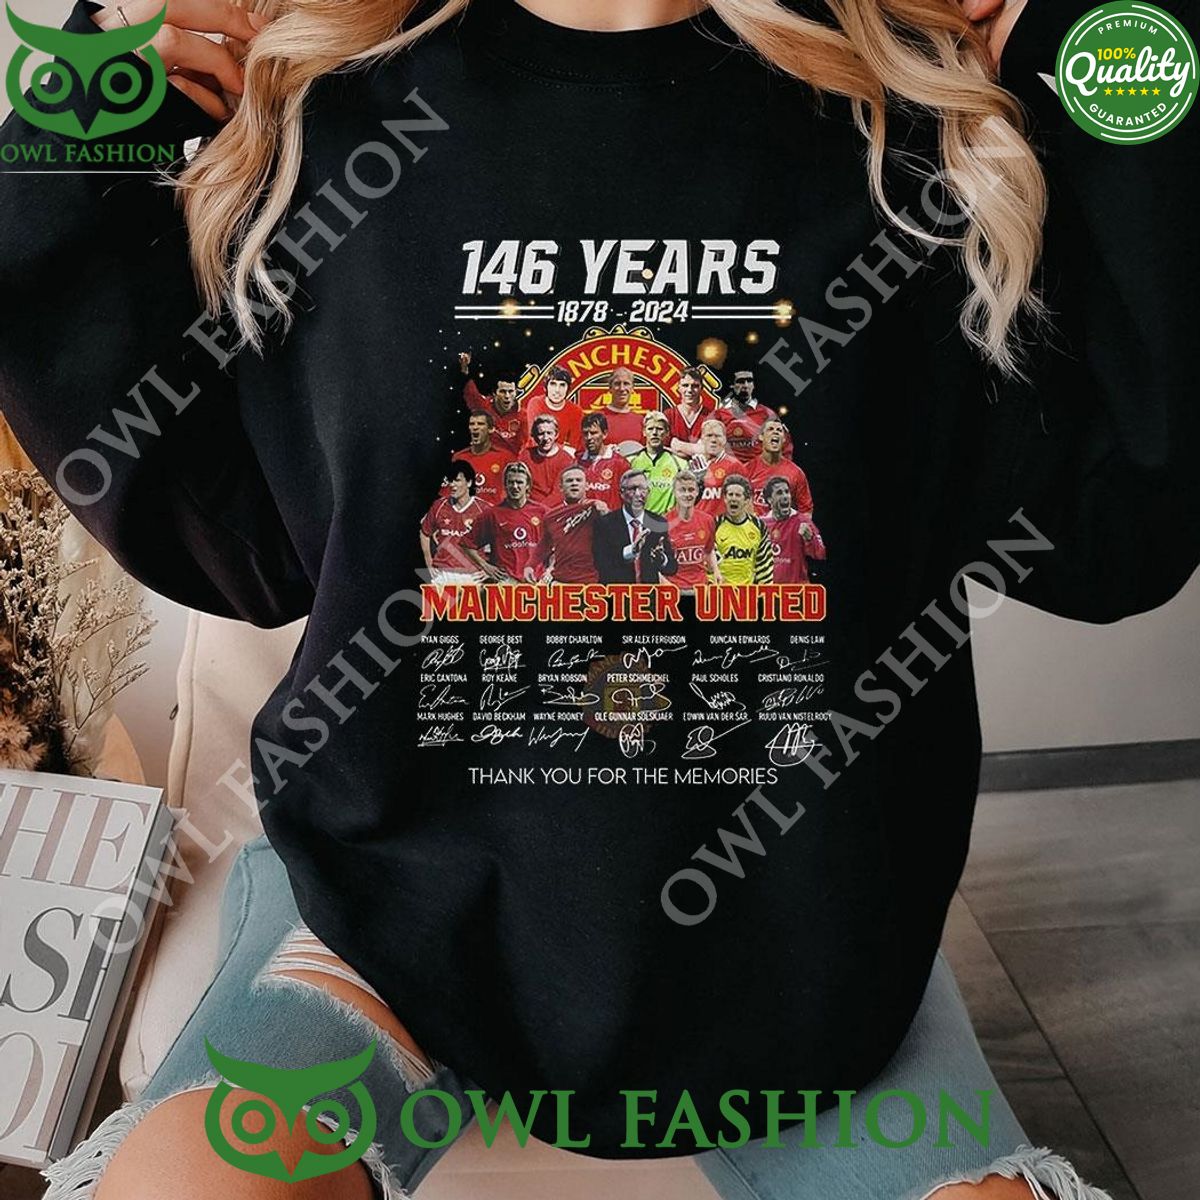 146 Years 1878 – 2024 Manchester United Thank You For The Memories 2D t shirt